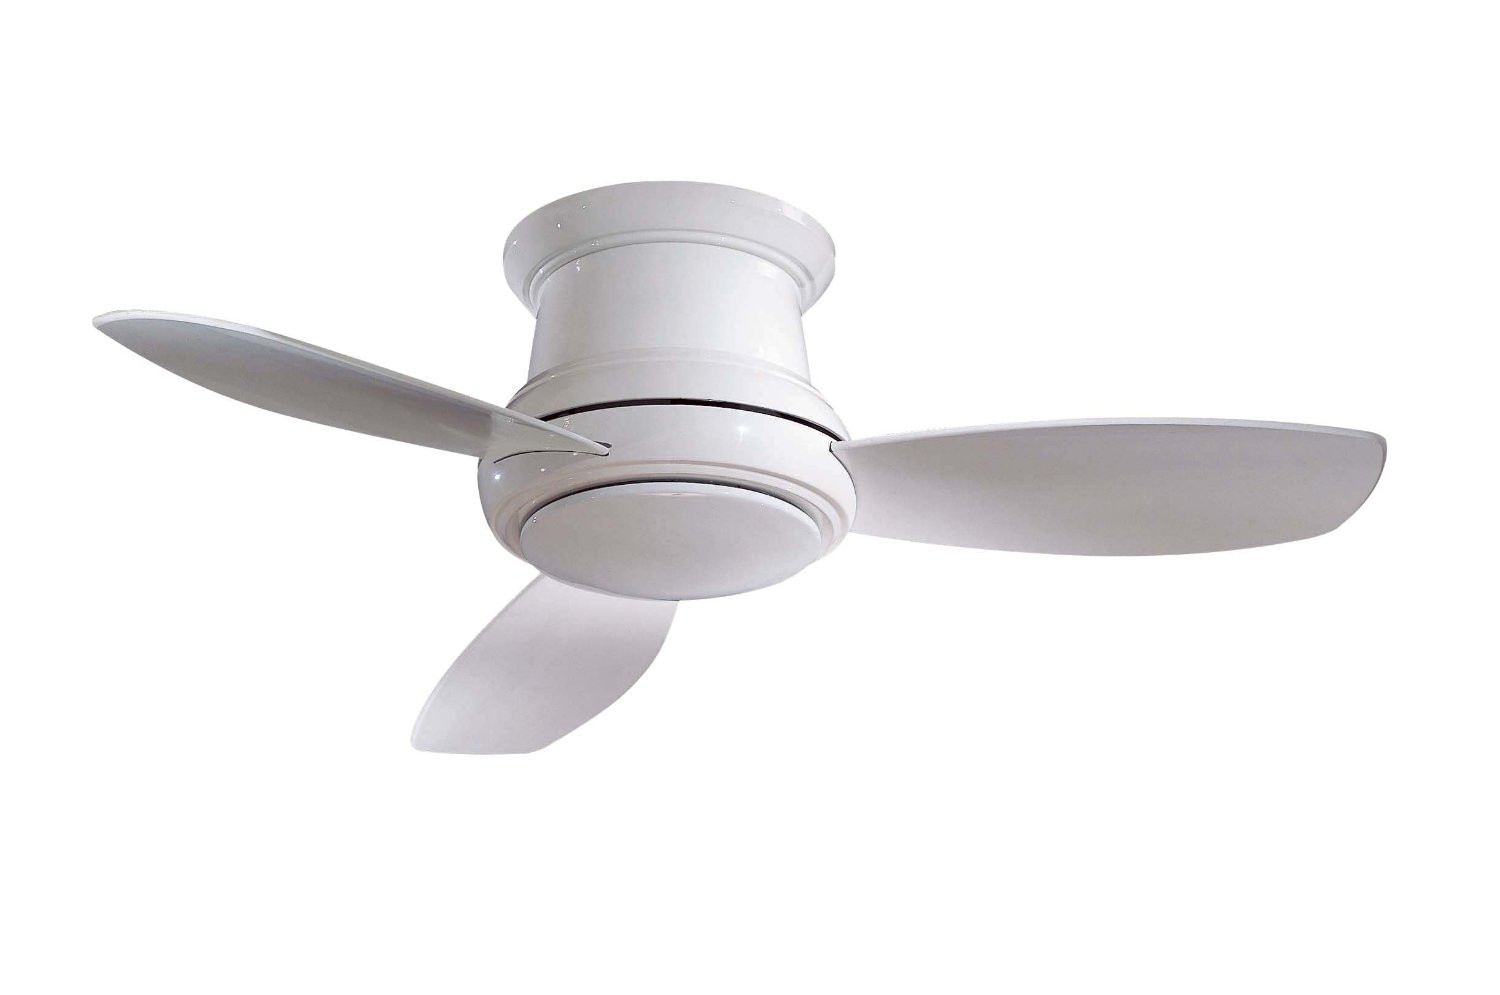 Small Fan For Kitchen
 10 Benefits of Small Kitchen Ceiling Fans